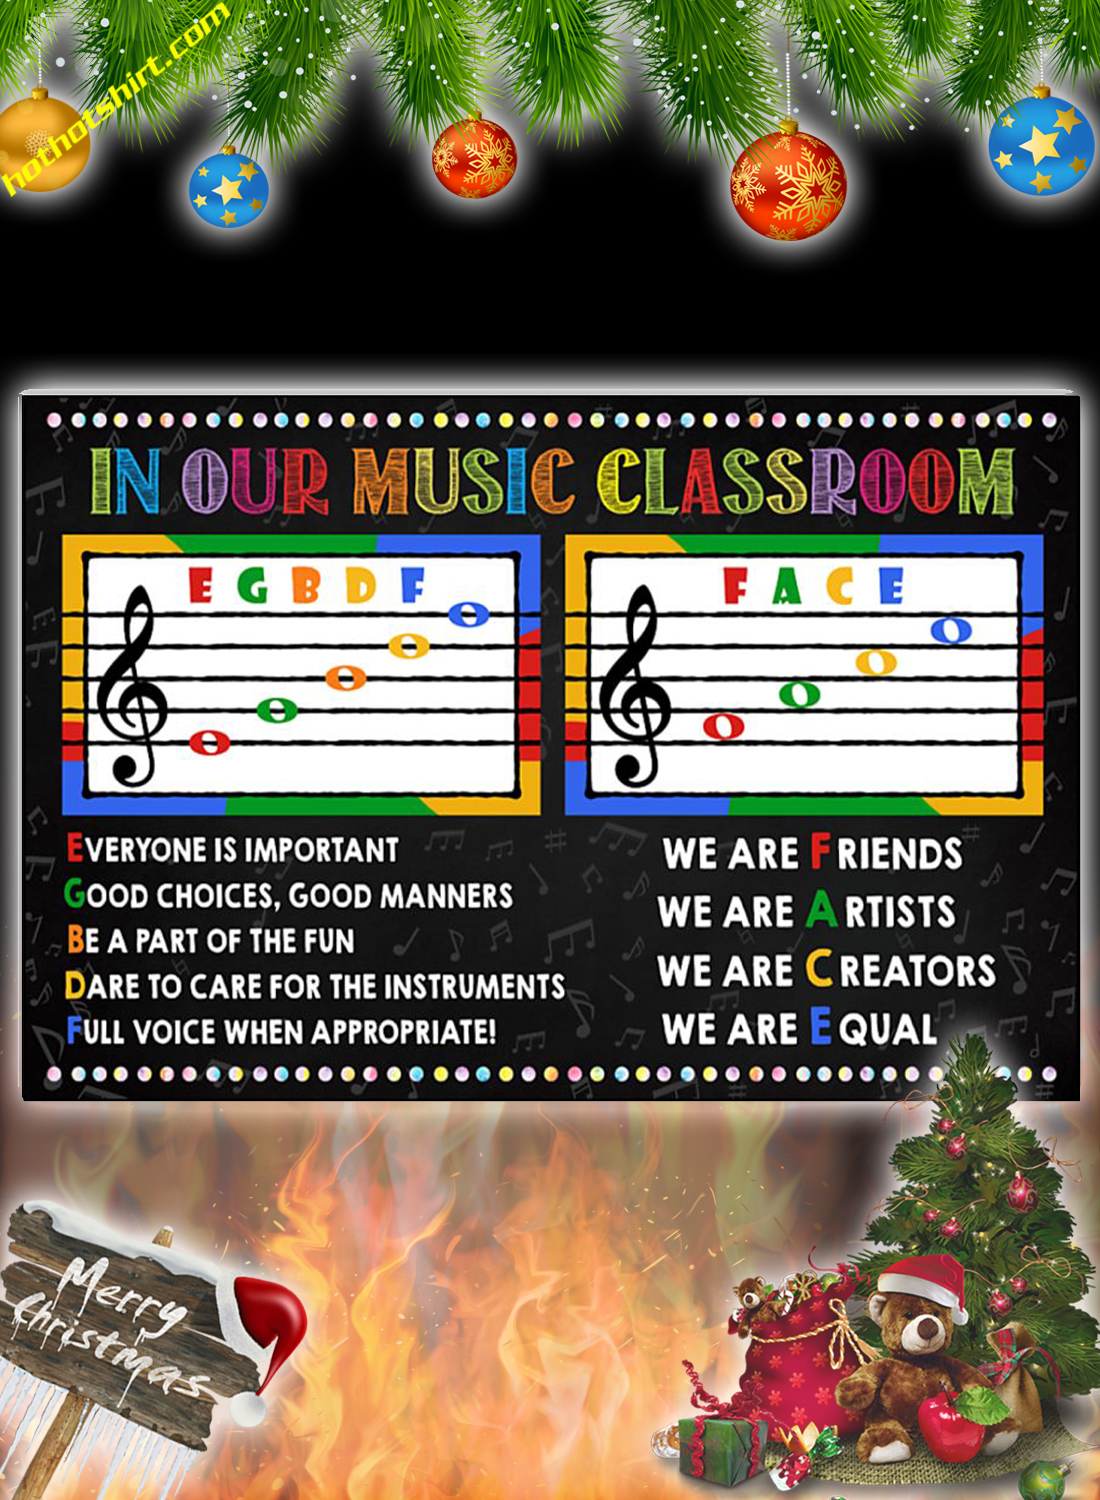 In our music classroom poster and canvas